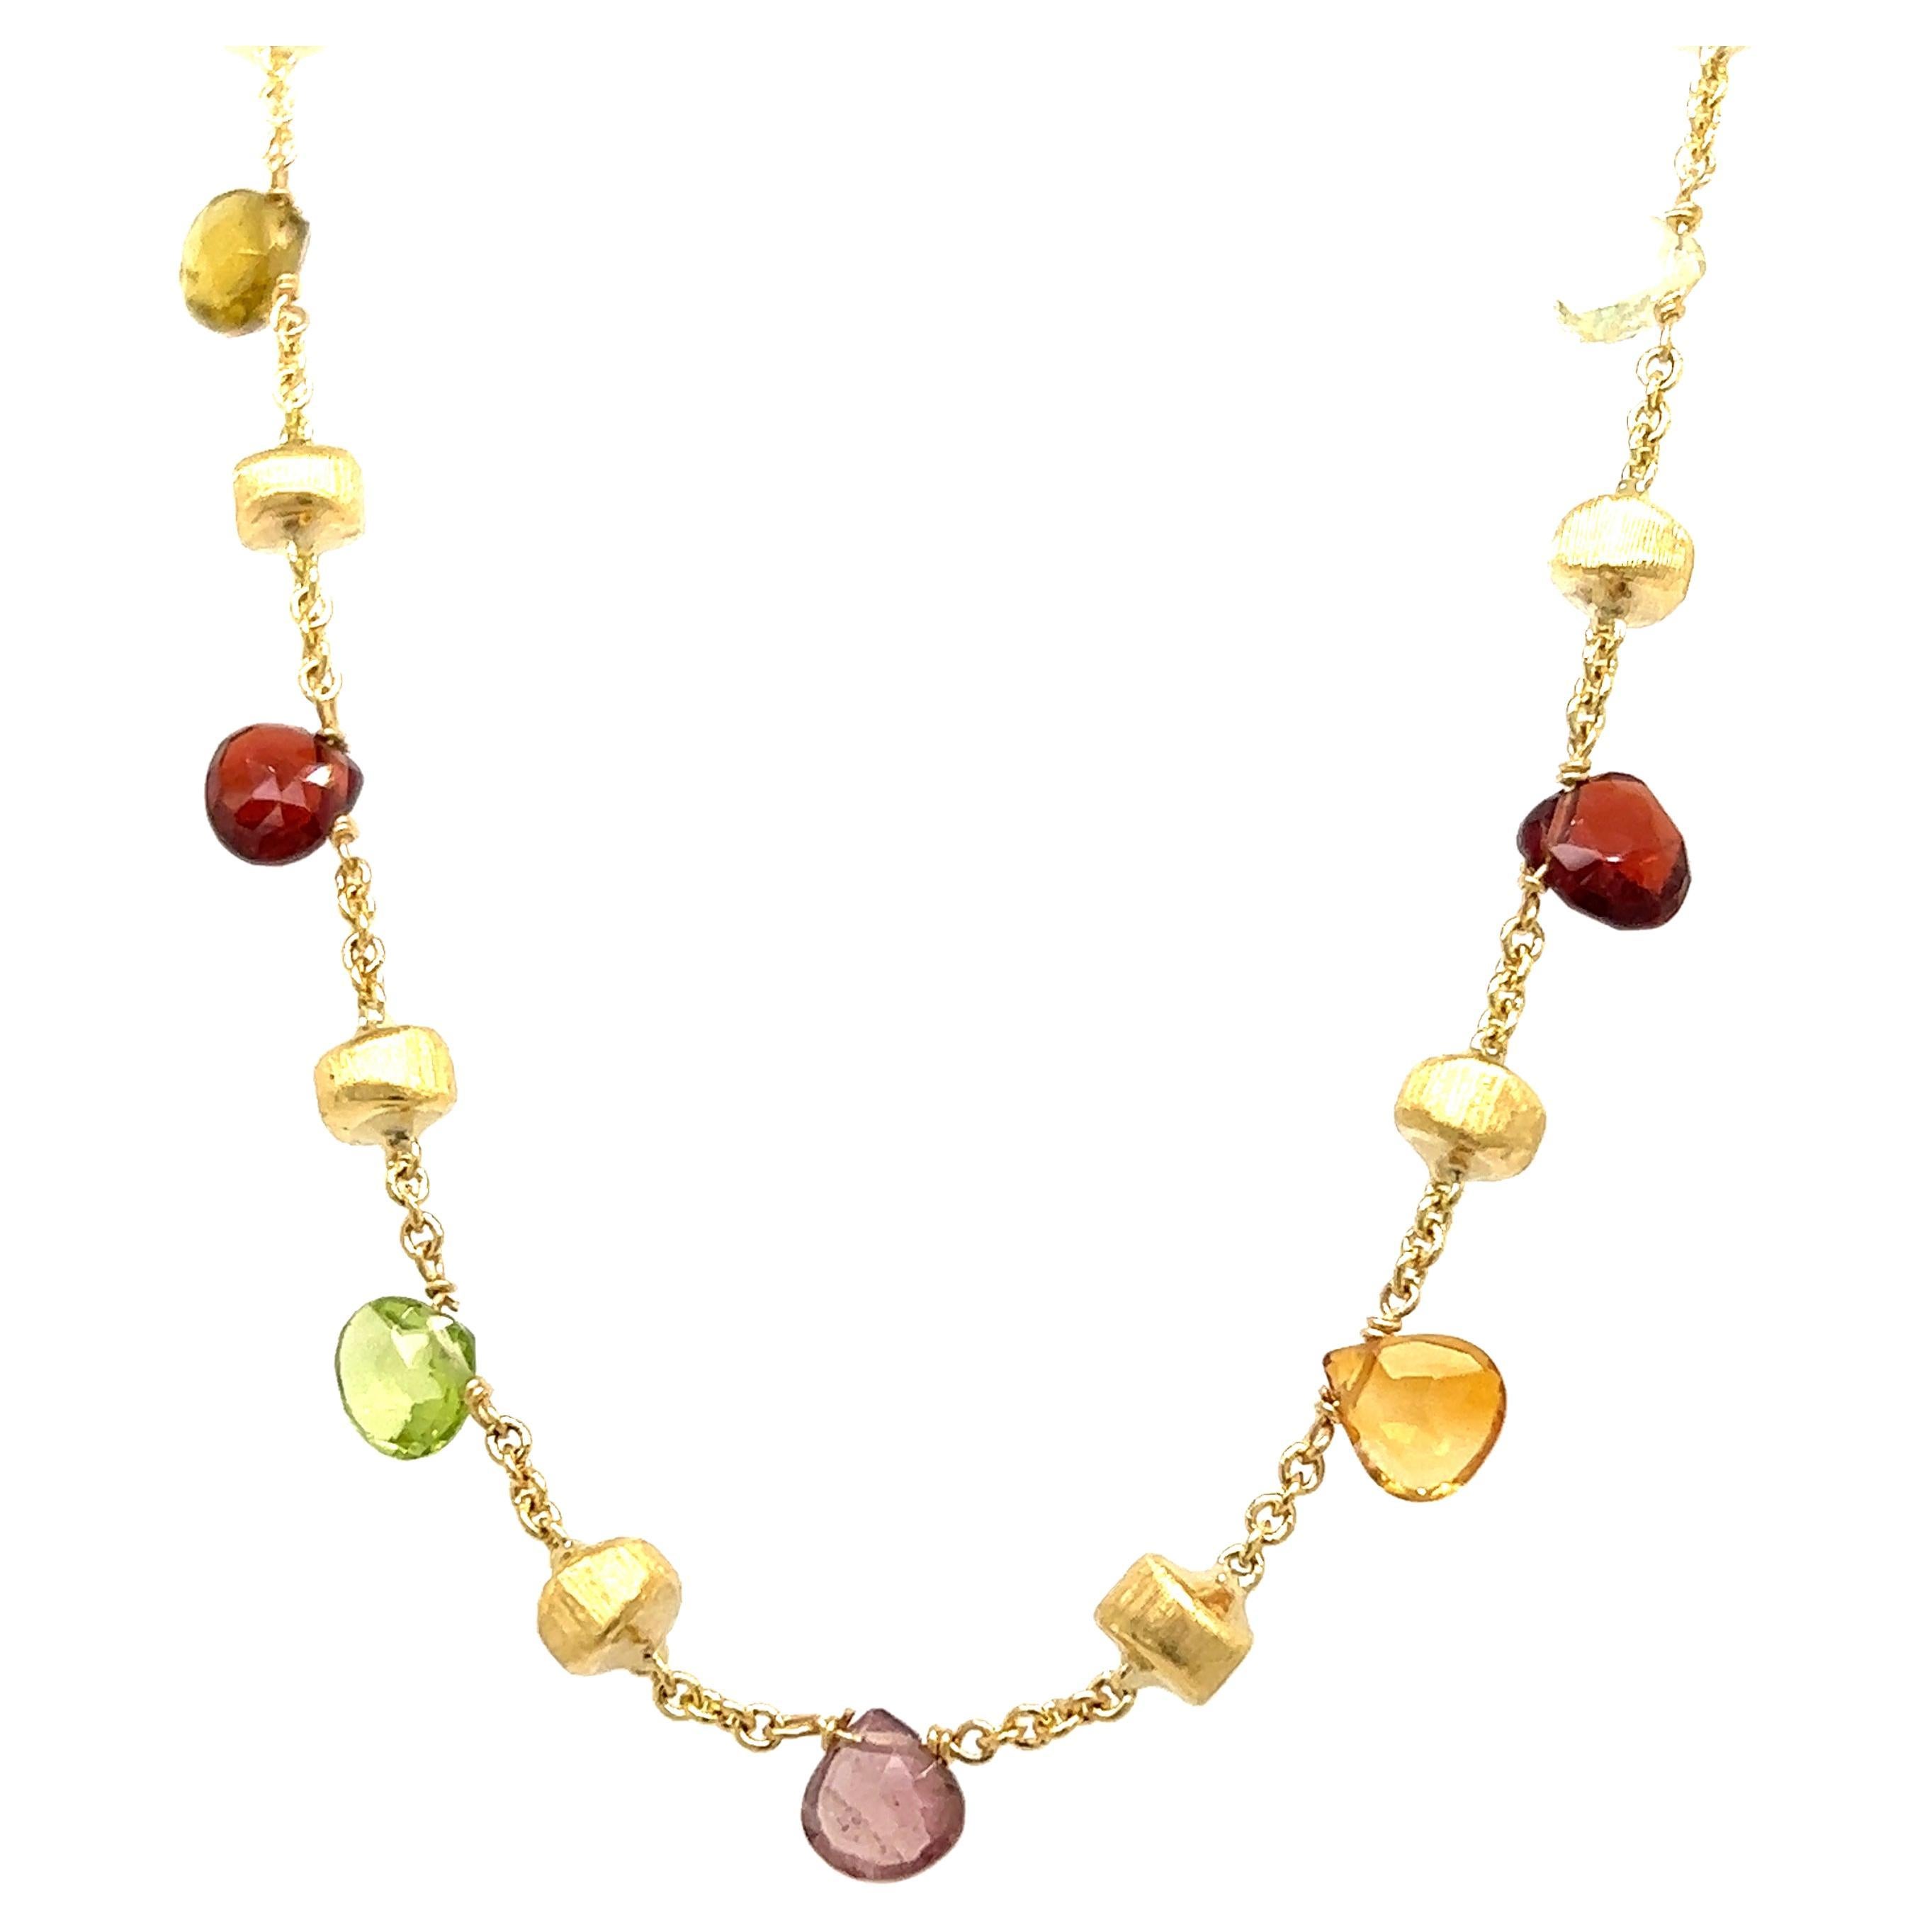 One 18-karat yellow gold multi-gemstone necklace, handcrafted in Italy by Marco Bicego from the Paradise collection. The necklace features twenty-two briolette cut gemstones, including amethysts, tourmaline, citrine and blue topaz, alternating with